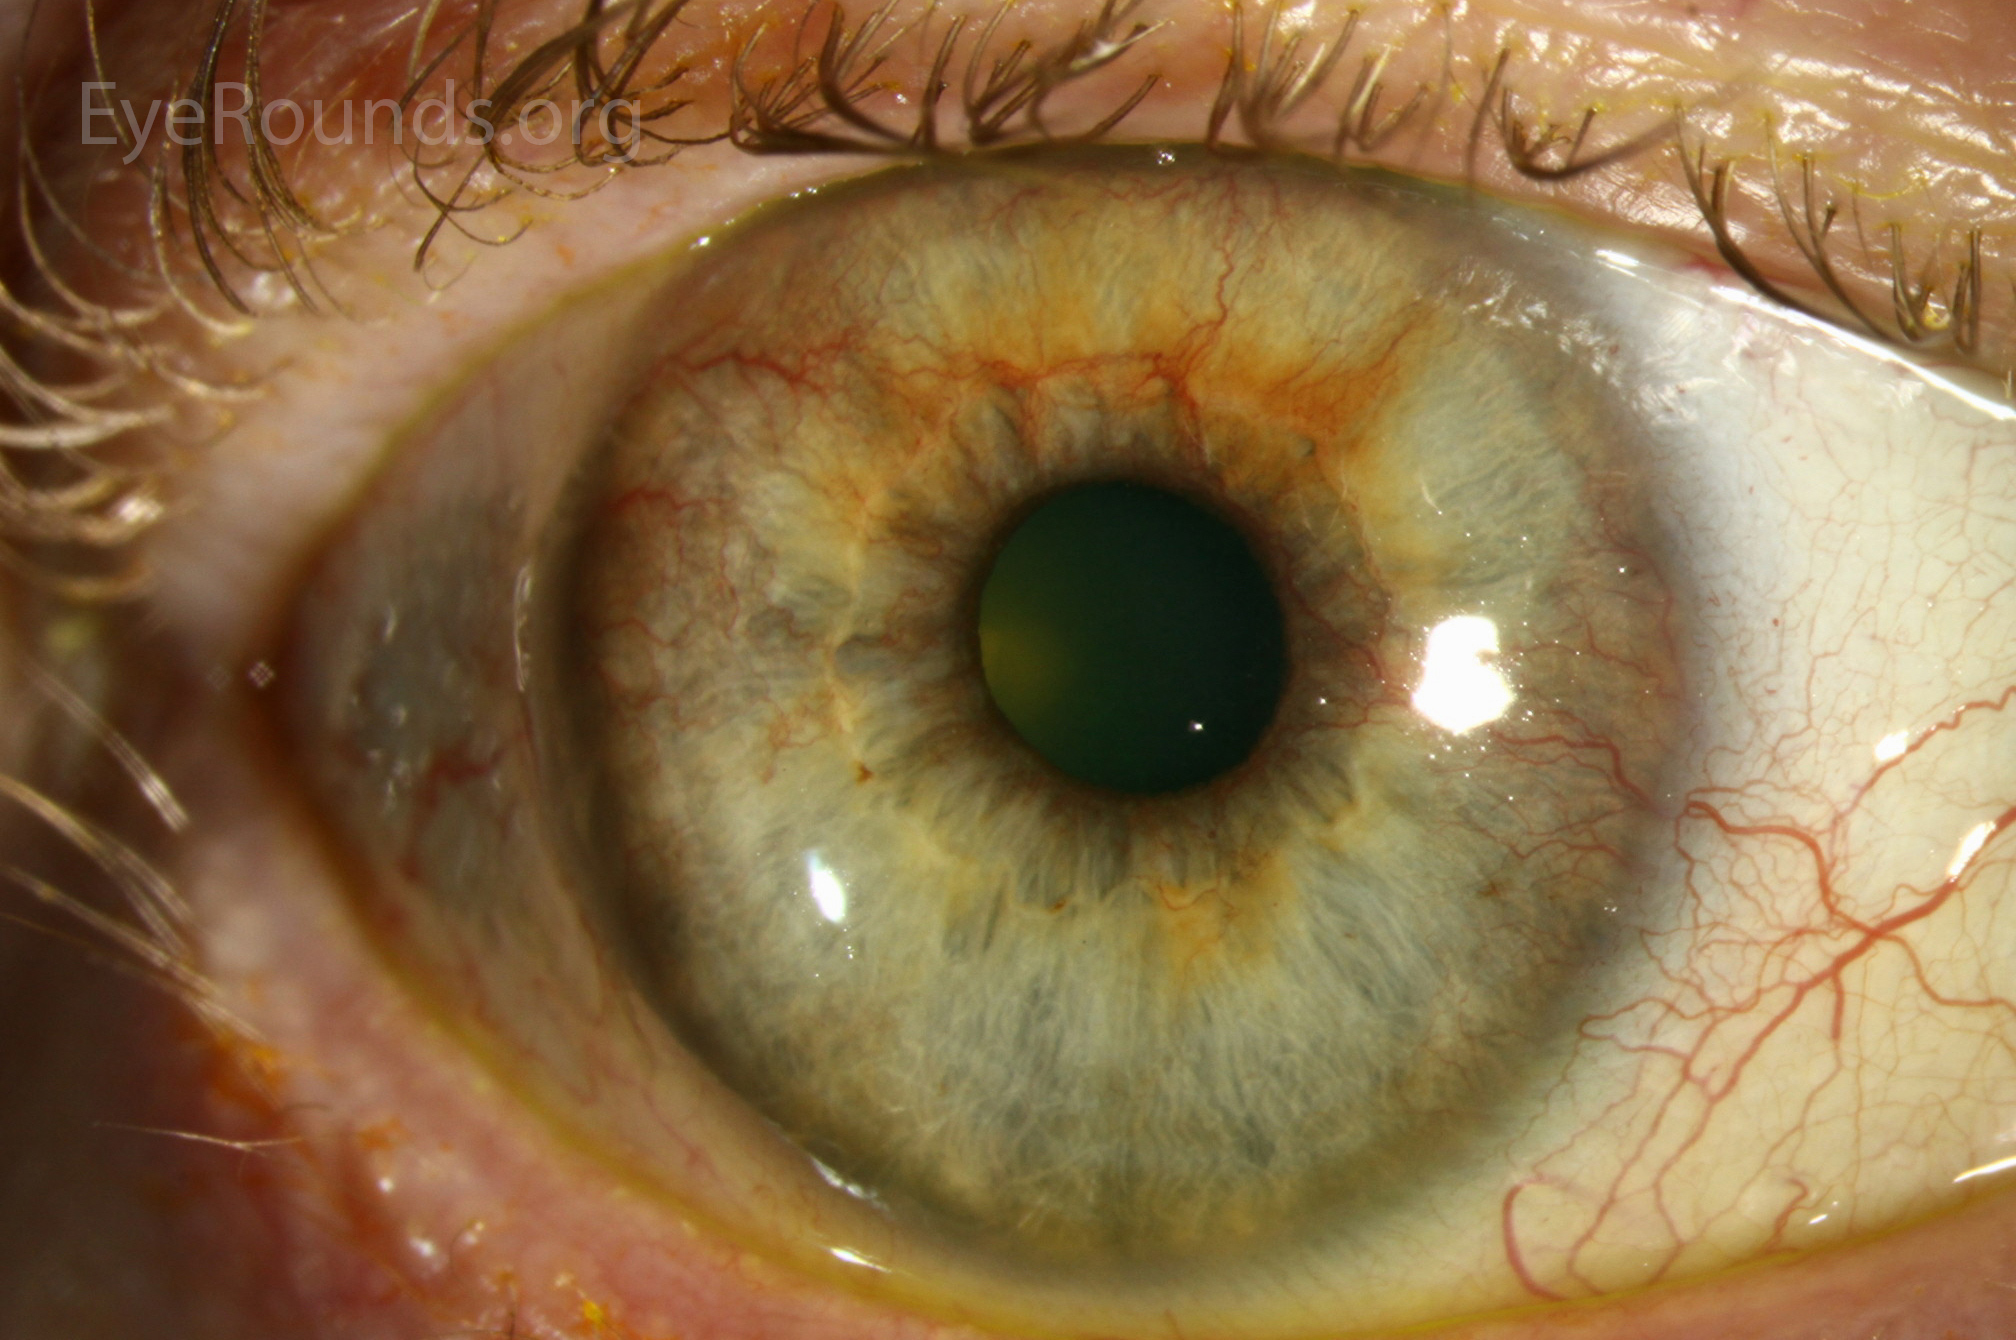 Swelling in retina due to diabetes